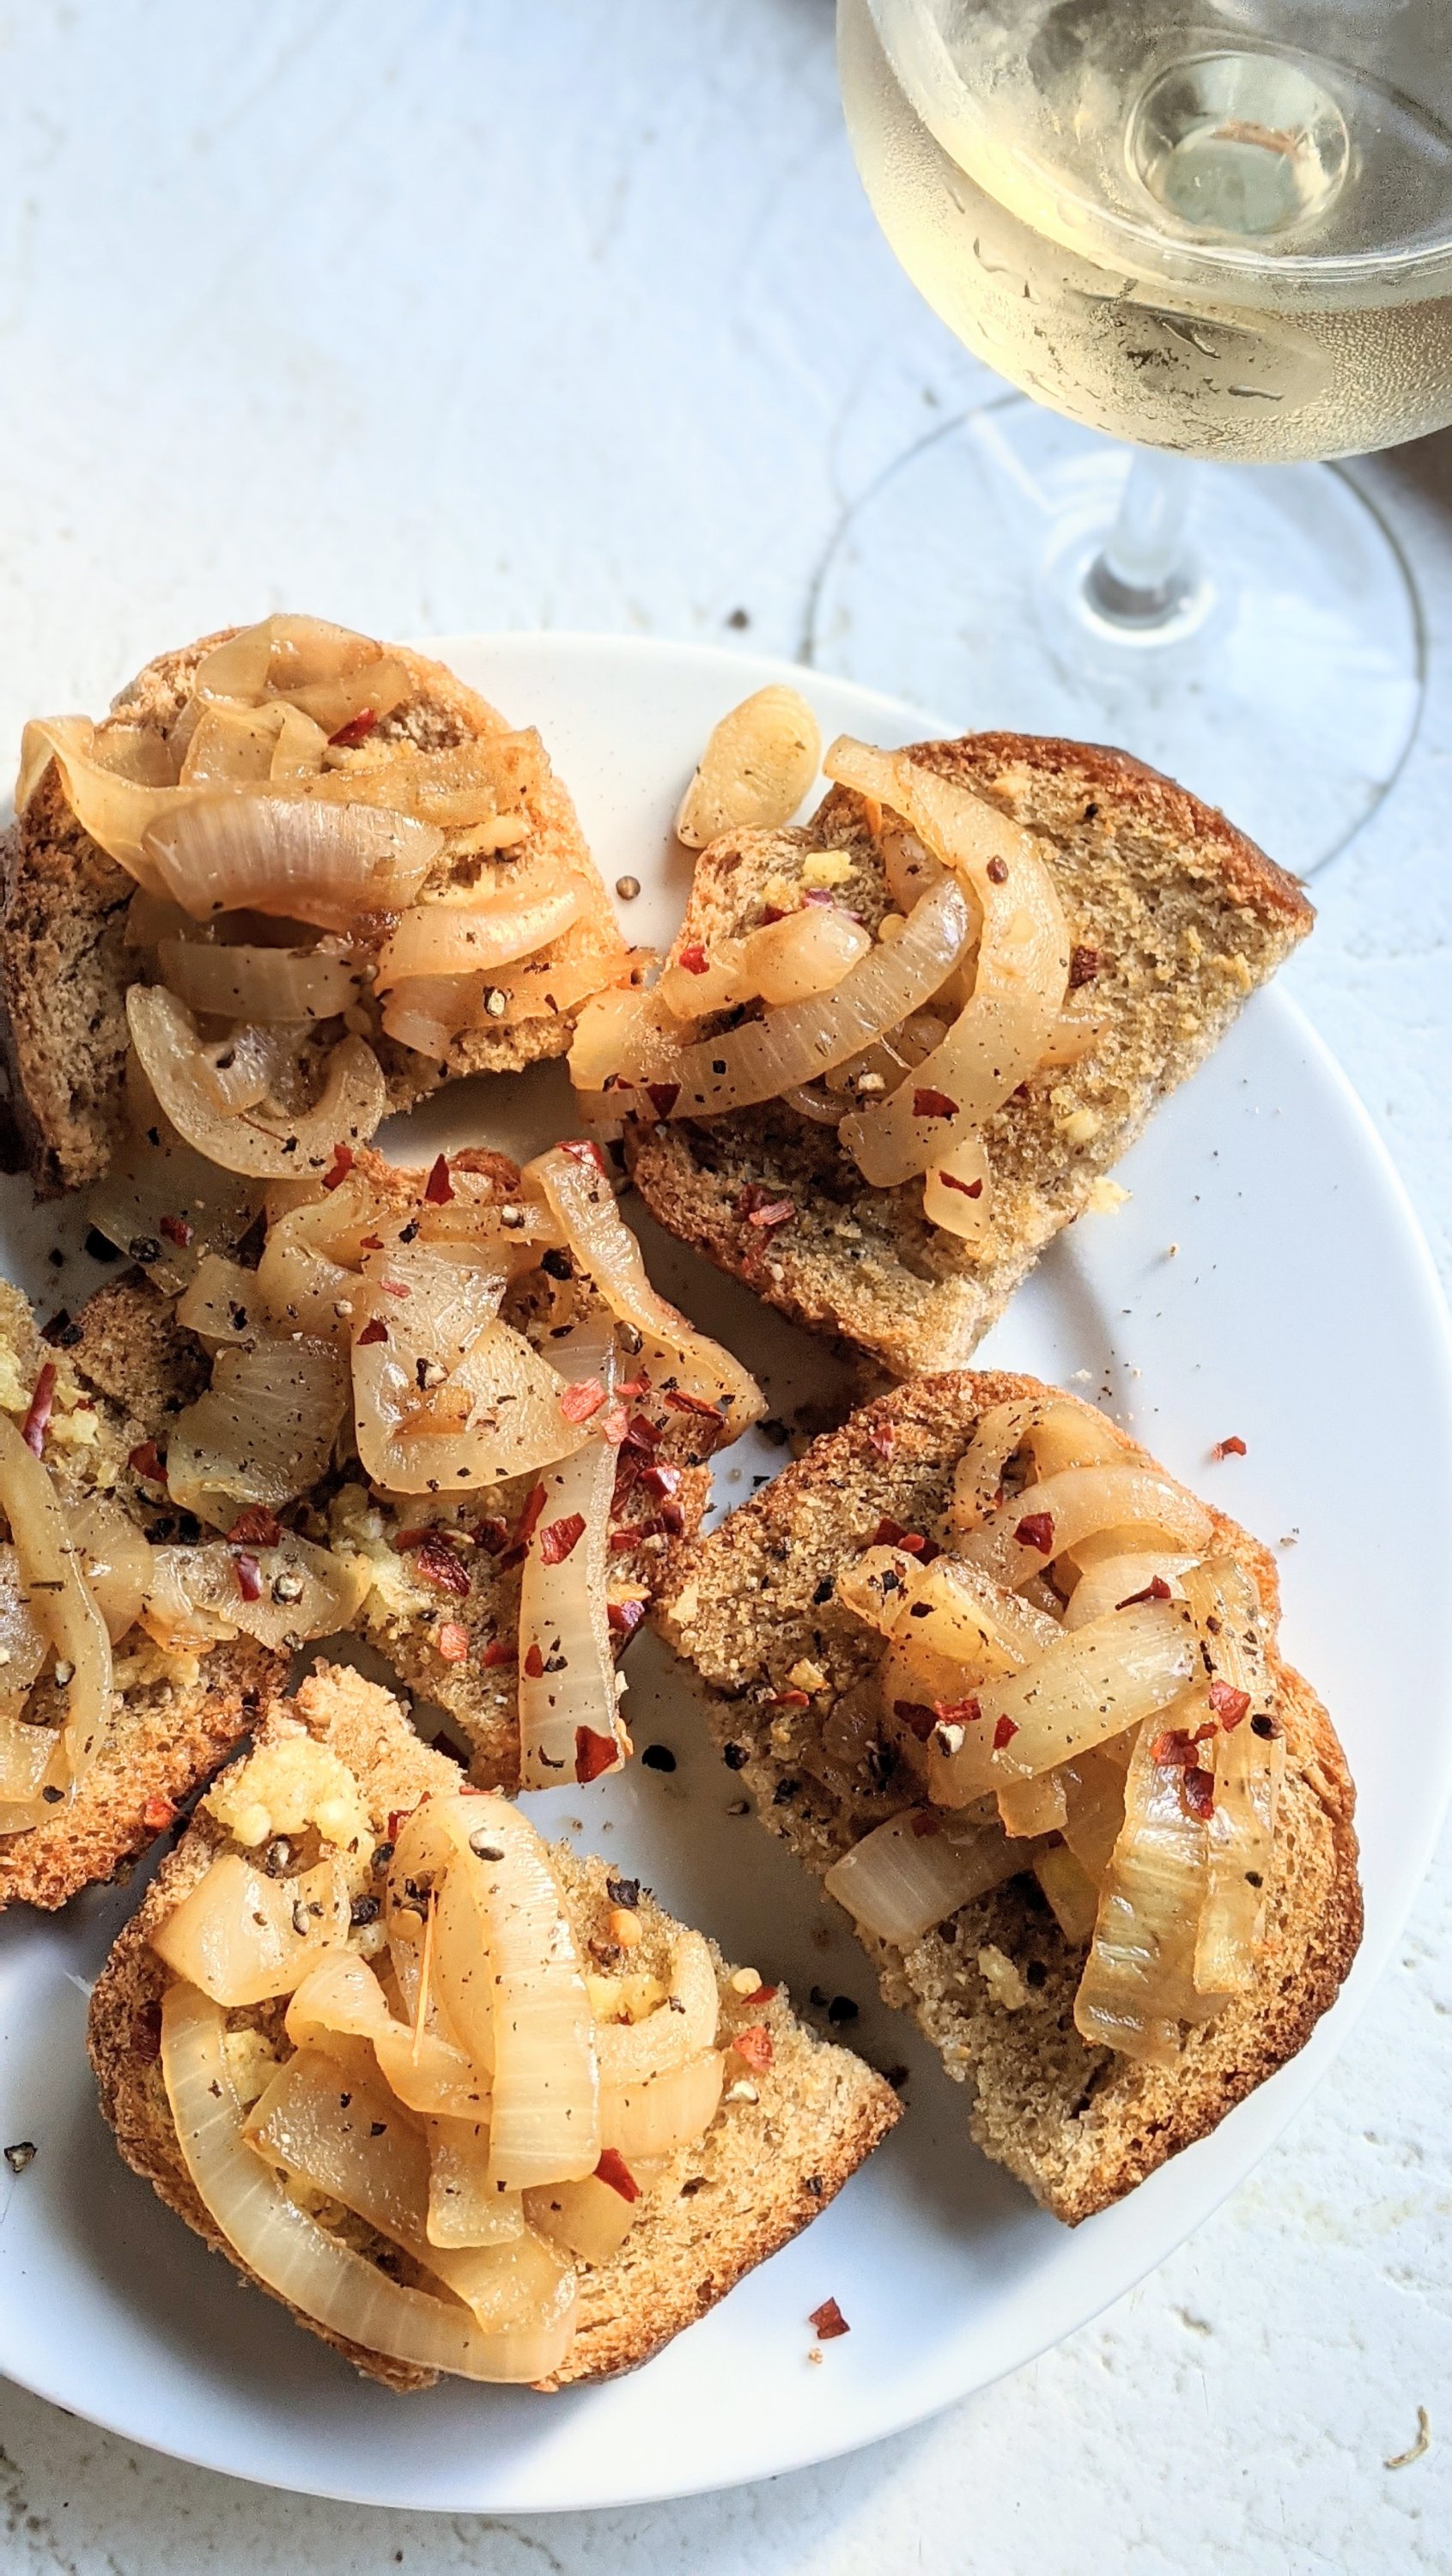 white wine caramelized onions garlic bread recipe with onions healhy plant based ways to make garlic bread fancy garlic bread extra amp up garlic bread toppings